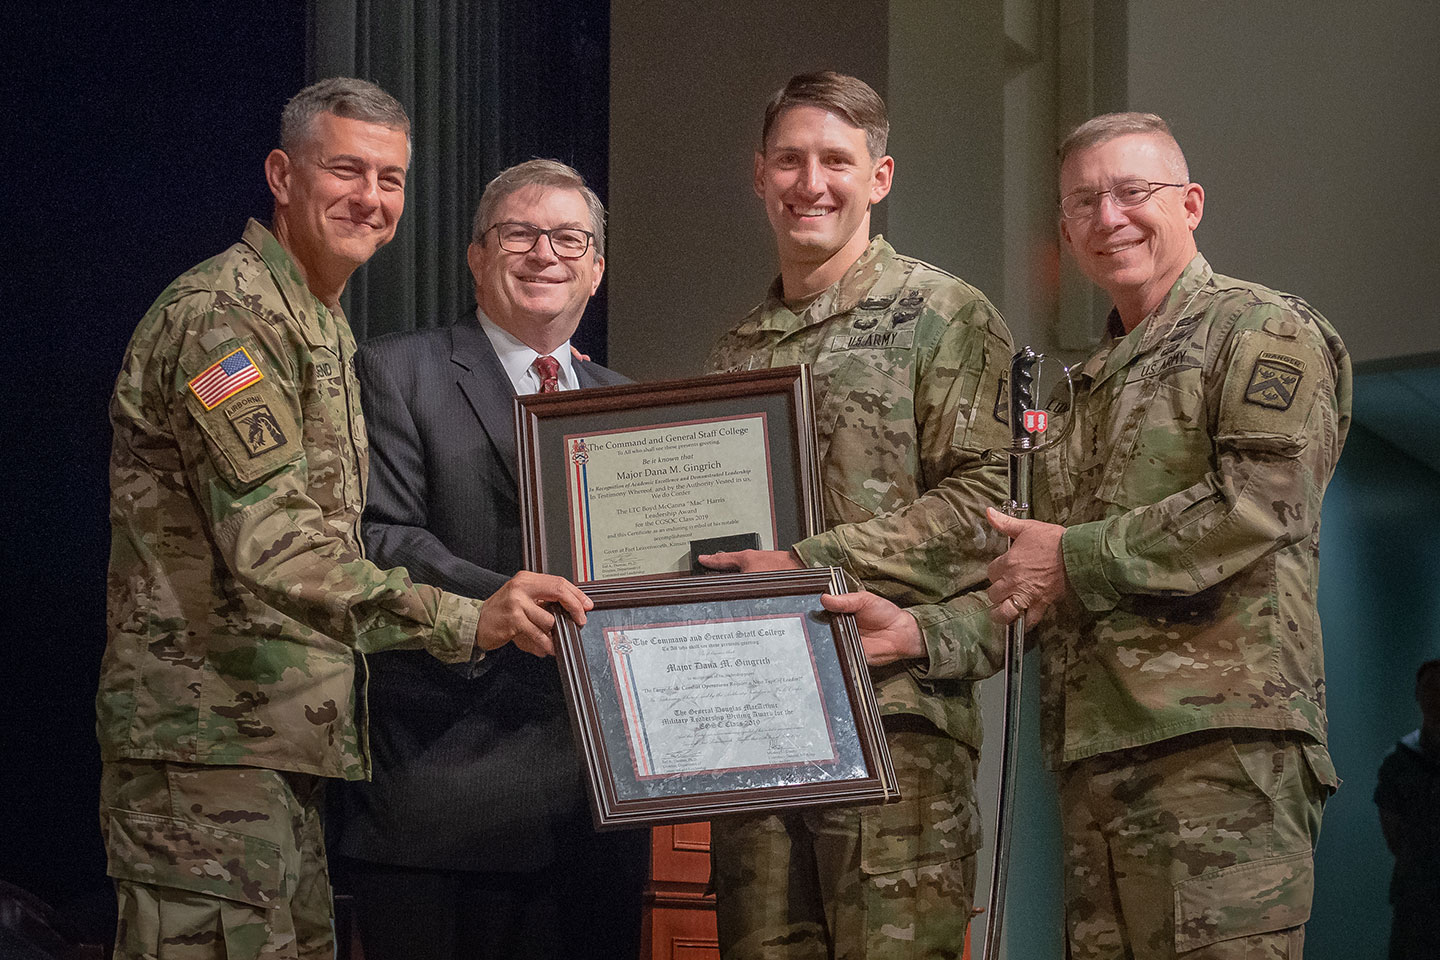 Major Dana M. Gingrich is congratulated by CGSC Commandant Lt. Gen. Michael Lundy (right), Gen. Stephen J. Townsend, Commander TRADOC, and Michael D. Hockley, Civilian Aide to the Secretary of the Army for Kansas and Chairman of the CGSC Foundation upon being named the General George C. Marshall awardee, the top U.S. graduate for the Command and General Staff Officers Class of 2019. Gingrich also received the General George S. Patton Jr. Master Tactician Award, General Douglas MacArthur Military Leadership Writing Award, and the Lt. Col. Boyd McCanna Harris Leadership Award during graduation ceremonies June 14 at Fort Leavenworth's Lewis and Clark Center. (Photo by Dan Neal)